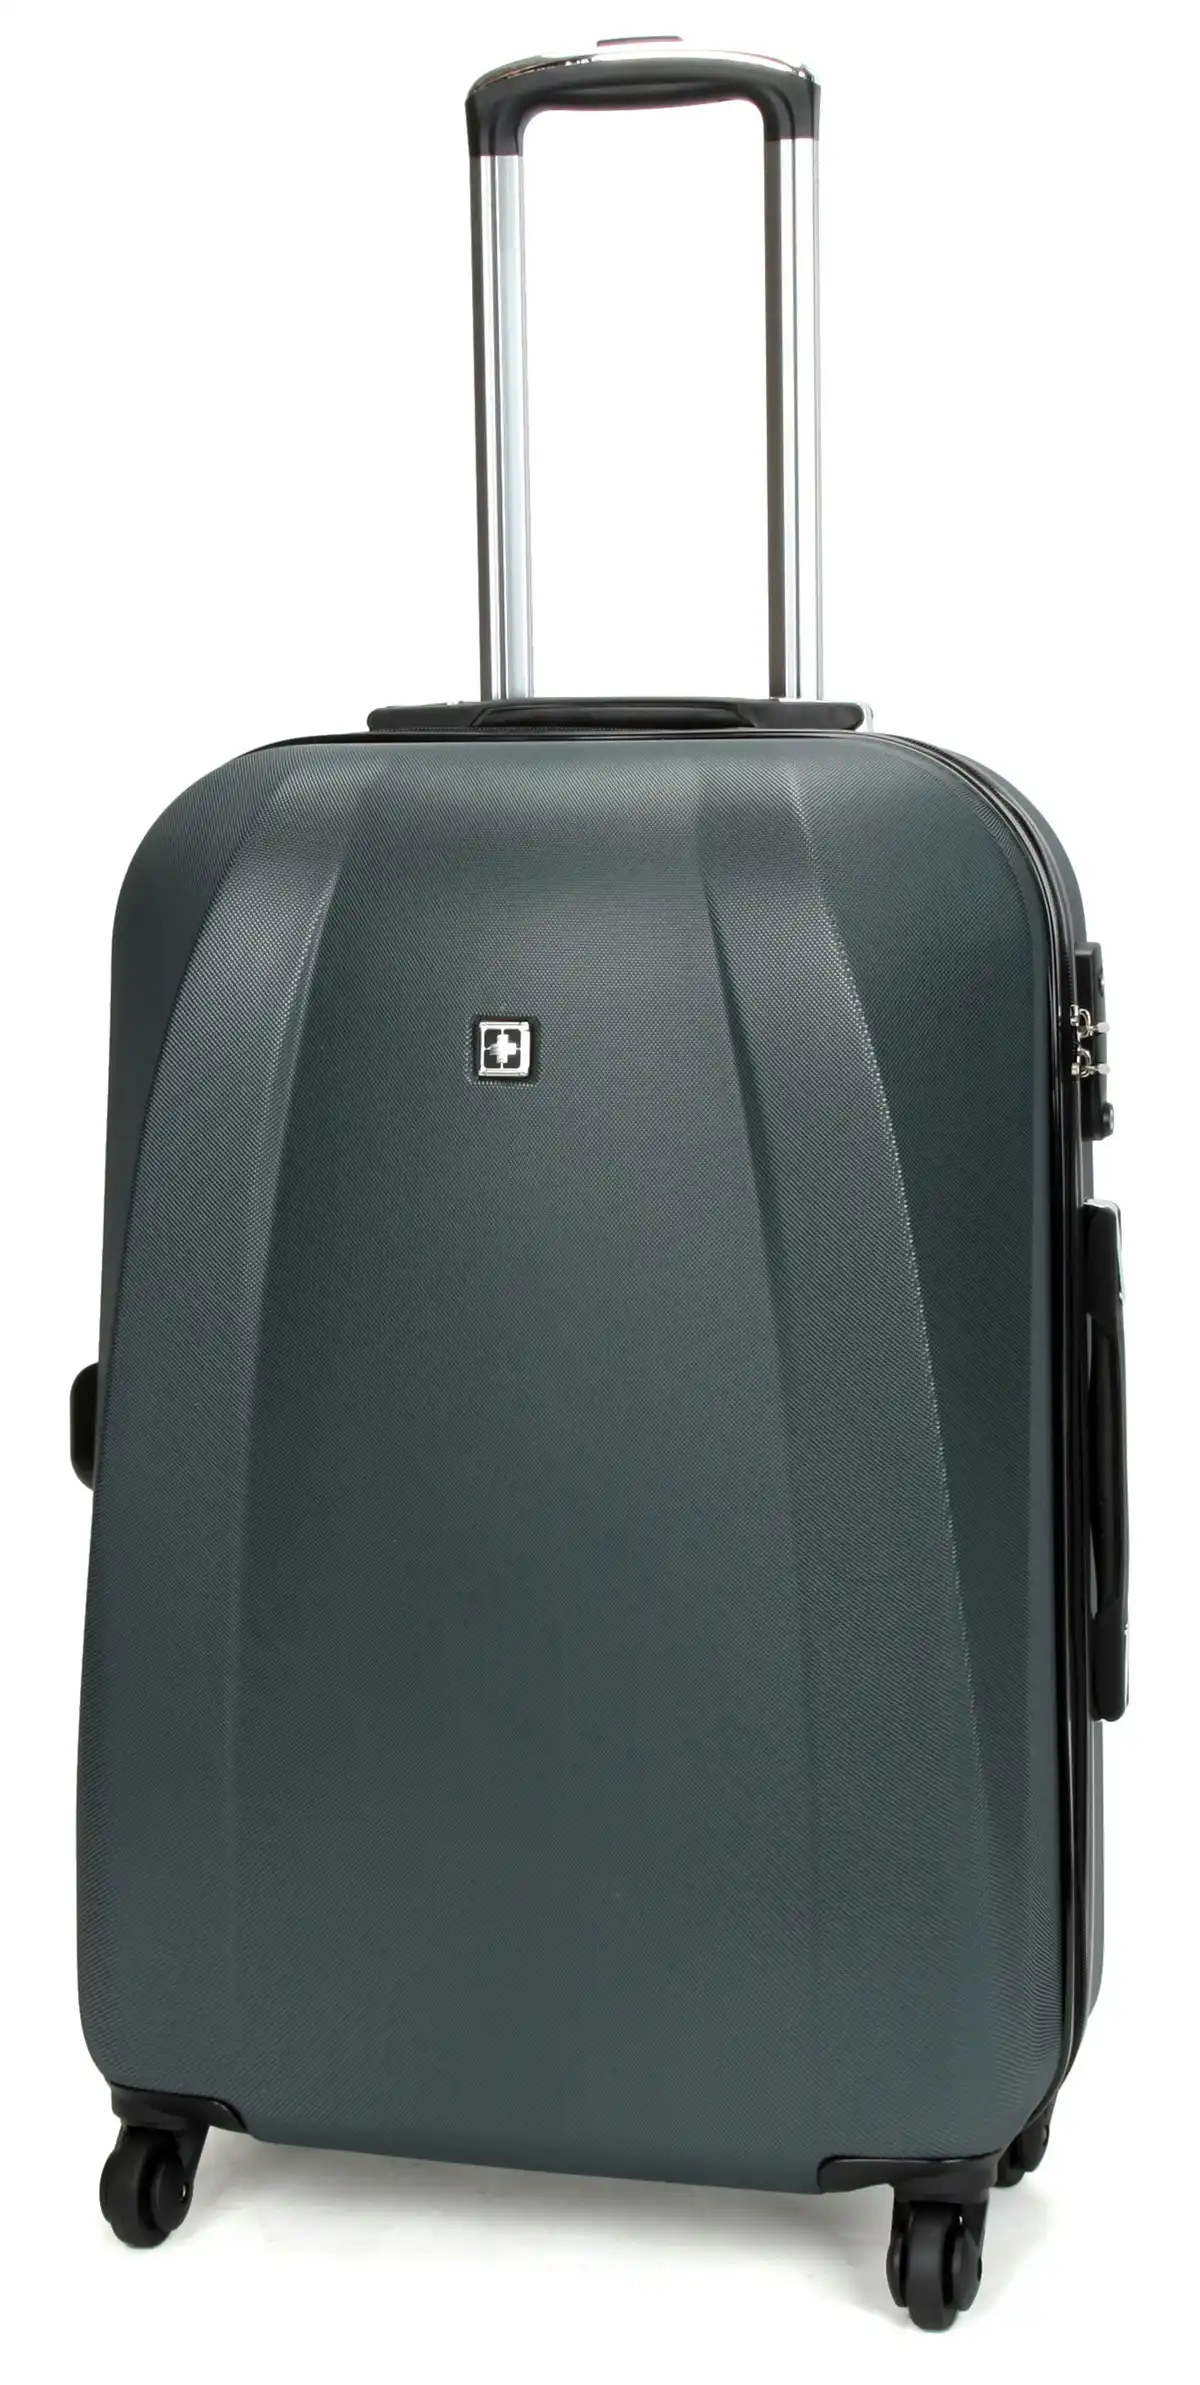 Suissewin Swiss Luggage Suitcase Lightweight With TSA Locker 360 Degree Rolling Carry on Hardcase SN6104A Grey